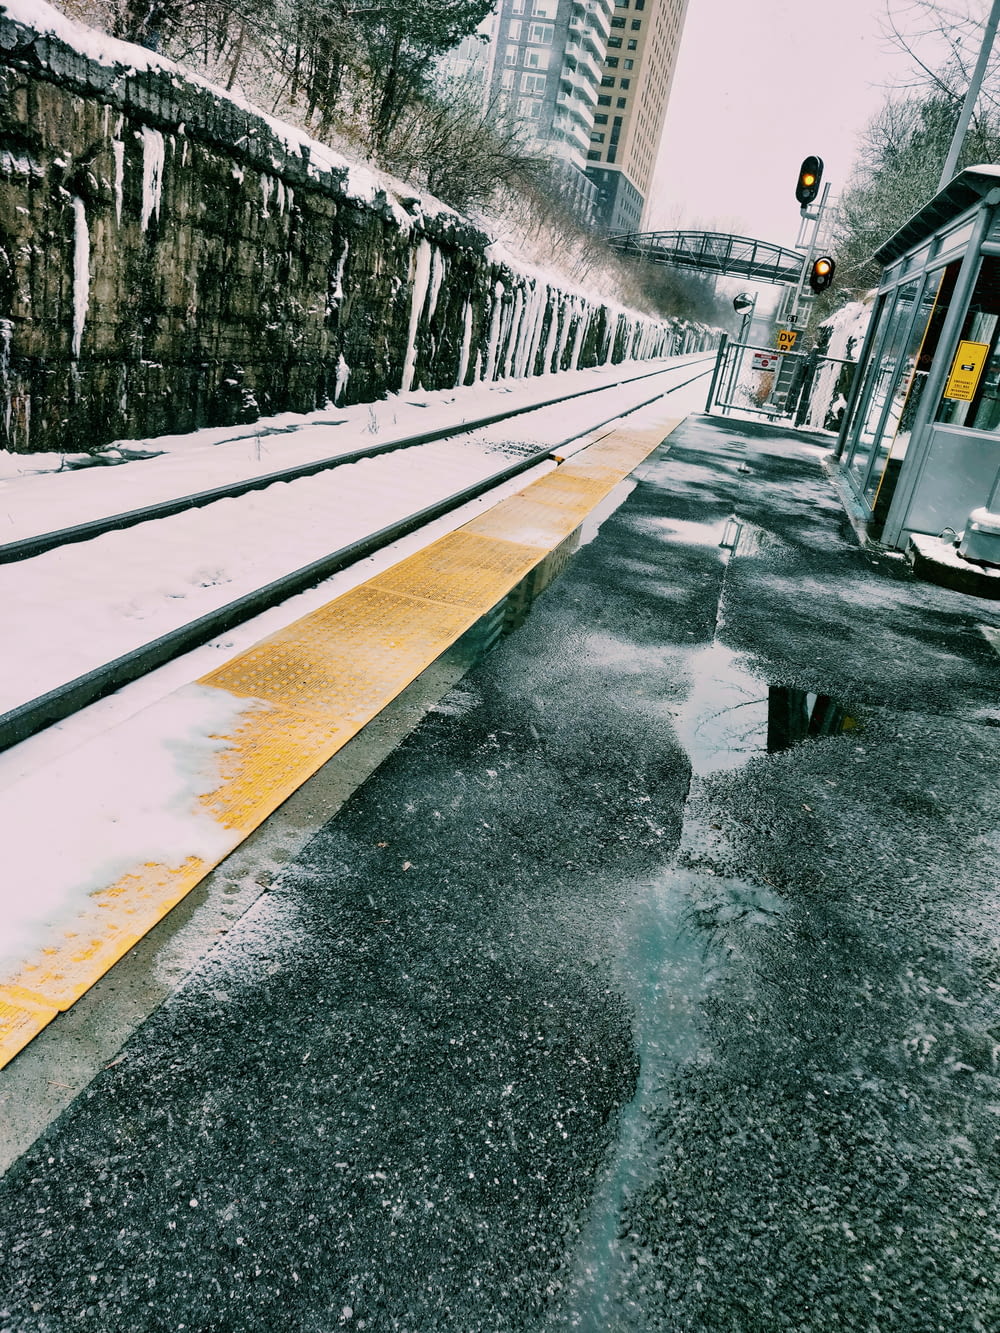 a train is stopped at a train station in the snow